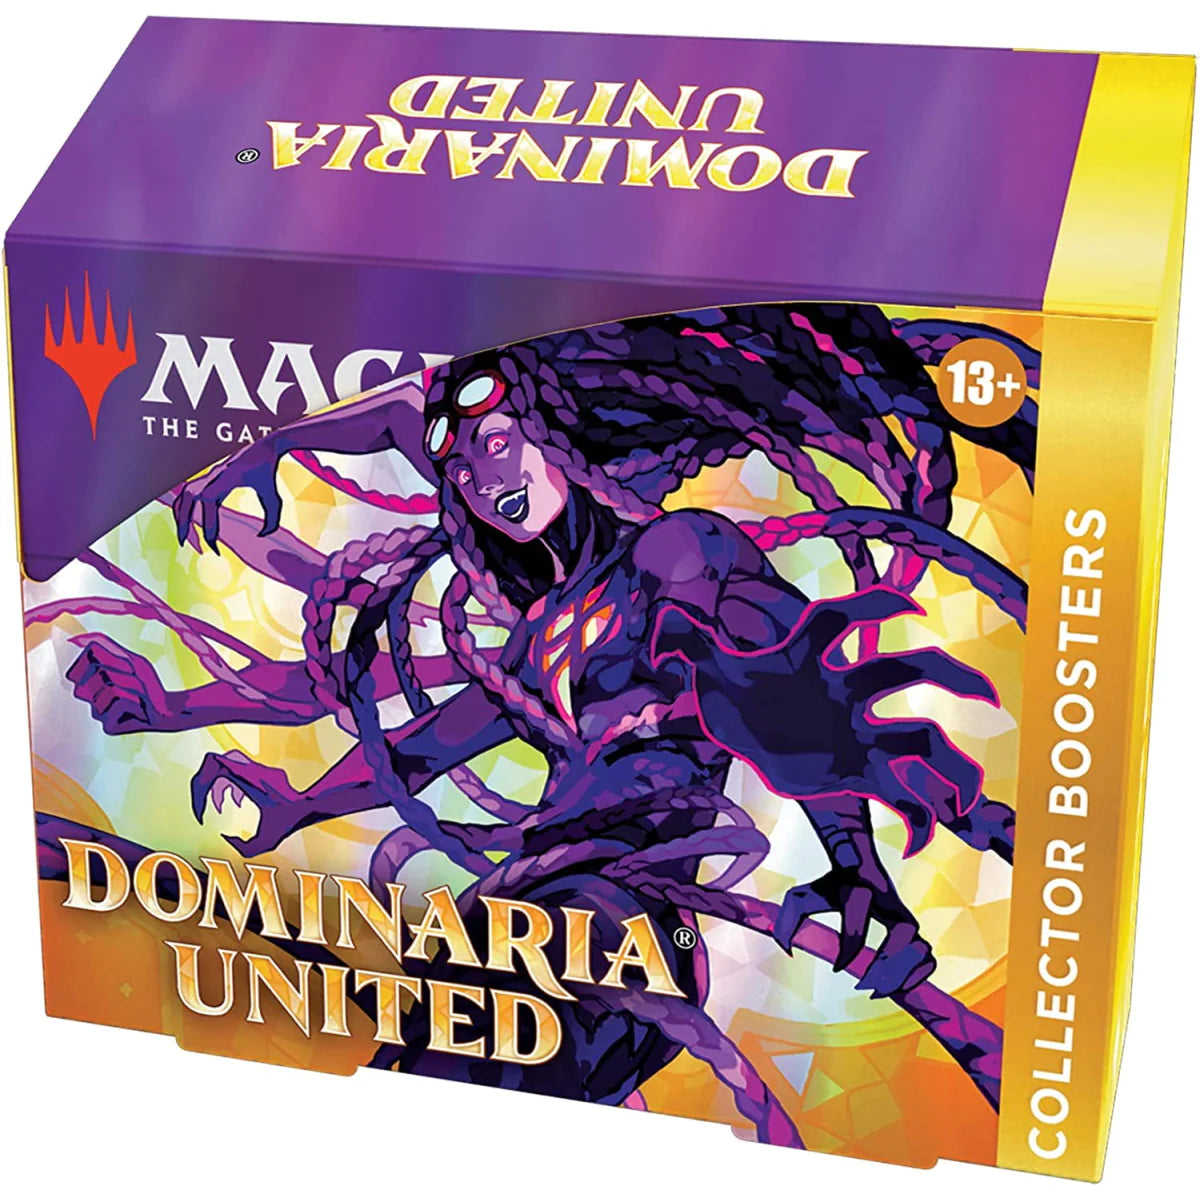 MTG - Dominaria United Collector Boosters